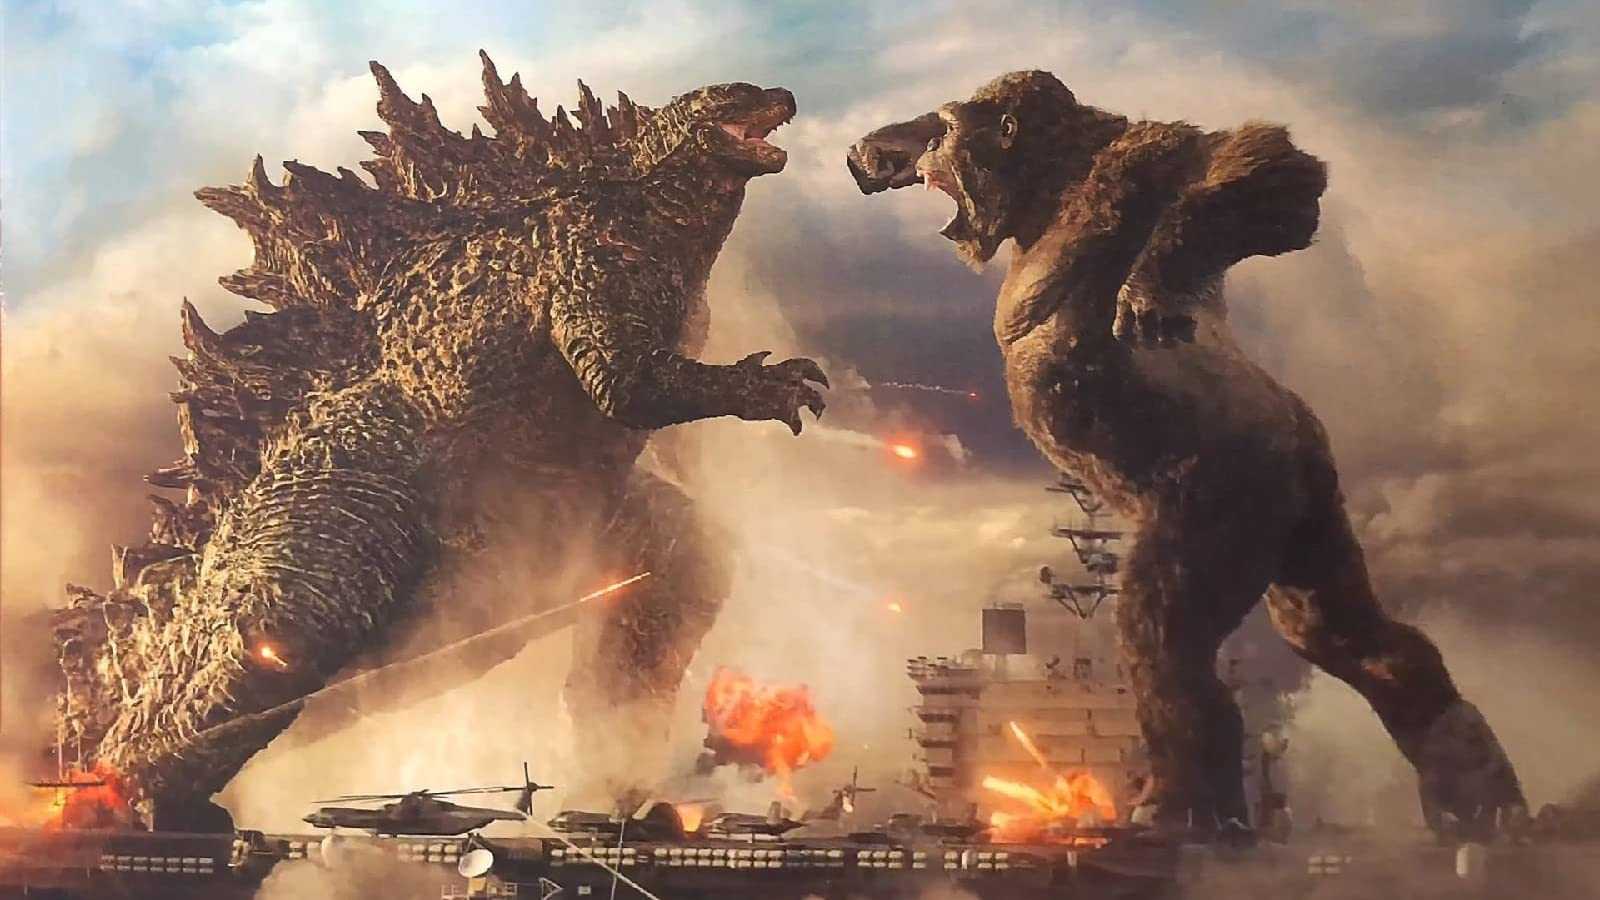 Godzilla: King of Monsters spinoff sneak peak shows terrified civilians running away from an unknown Kaiju